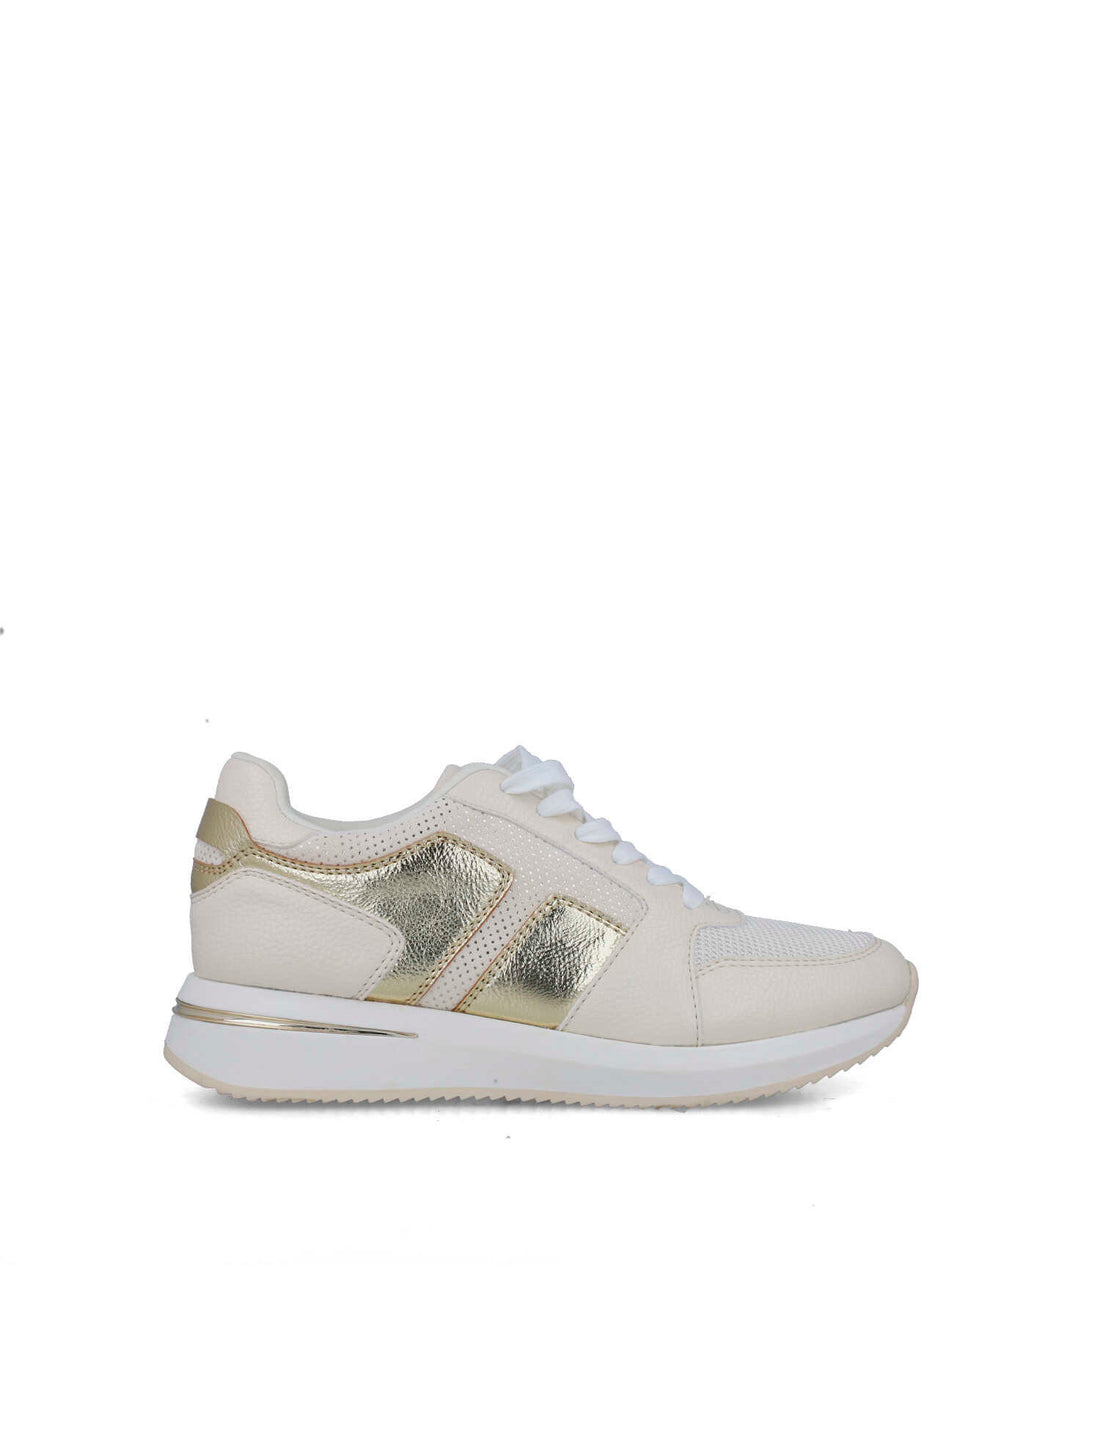 Beige Trainers With Gold Details_25611_00_01